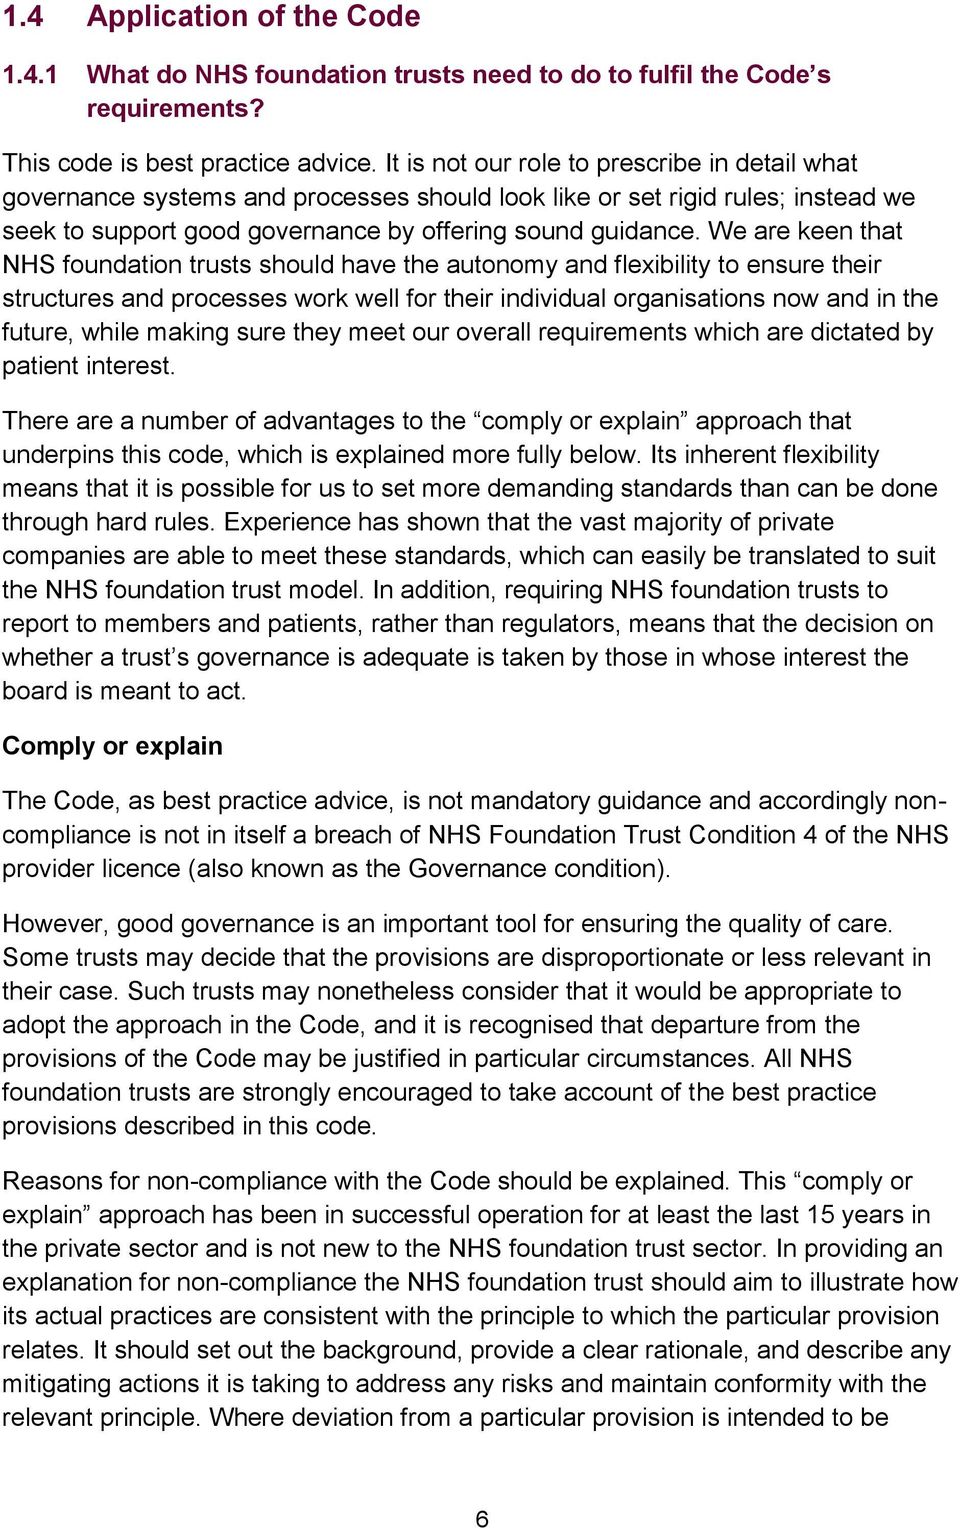 We are keen that NHS foundation trusts should have the autonomy and flexibility to ensure their structures and processes work well for their individual organisations now and in the future, while